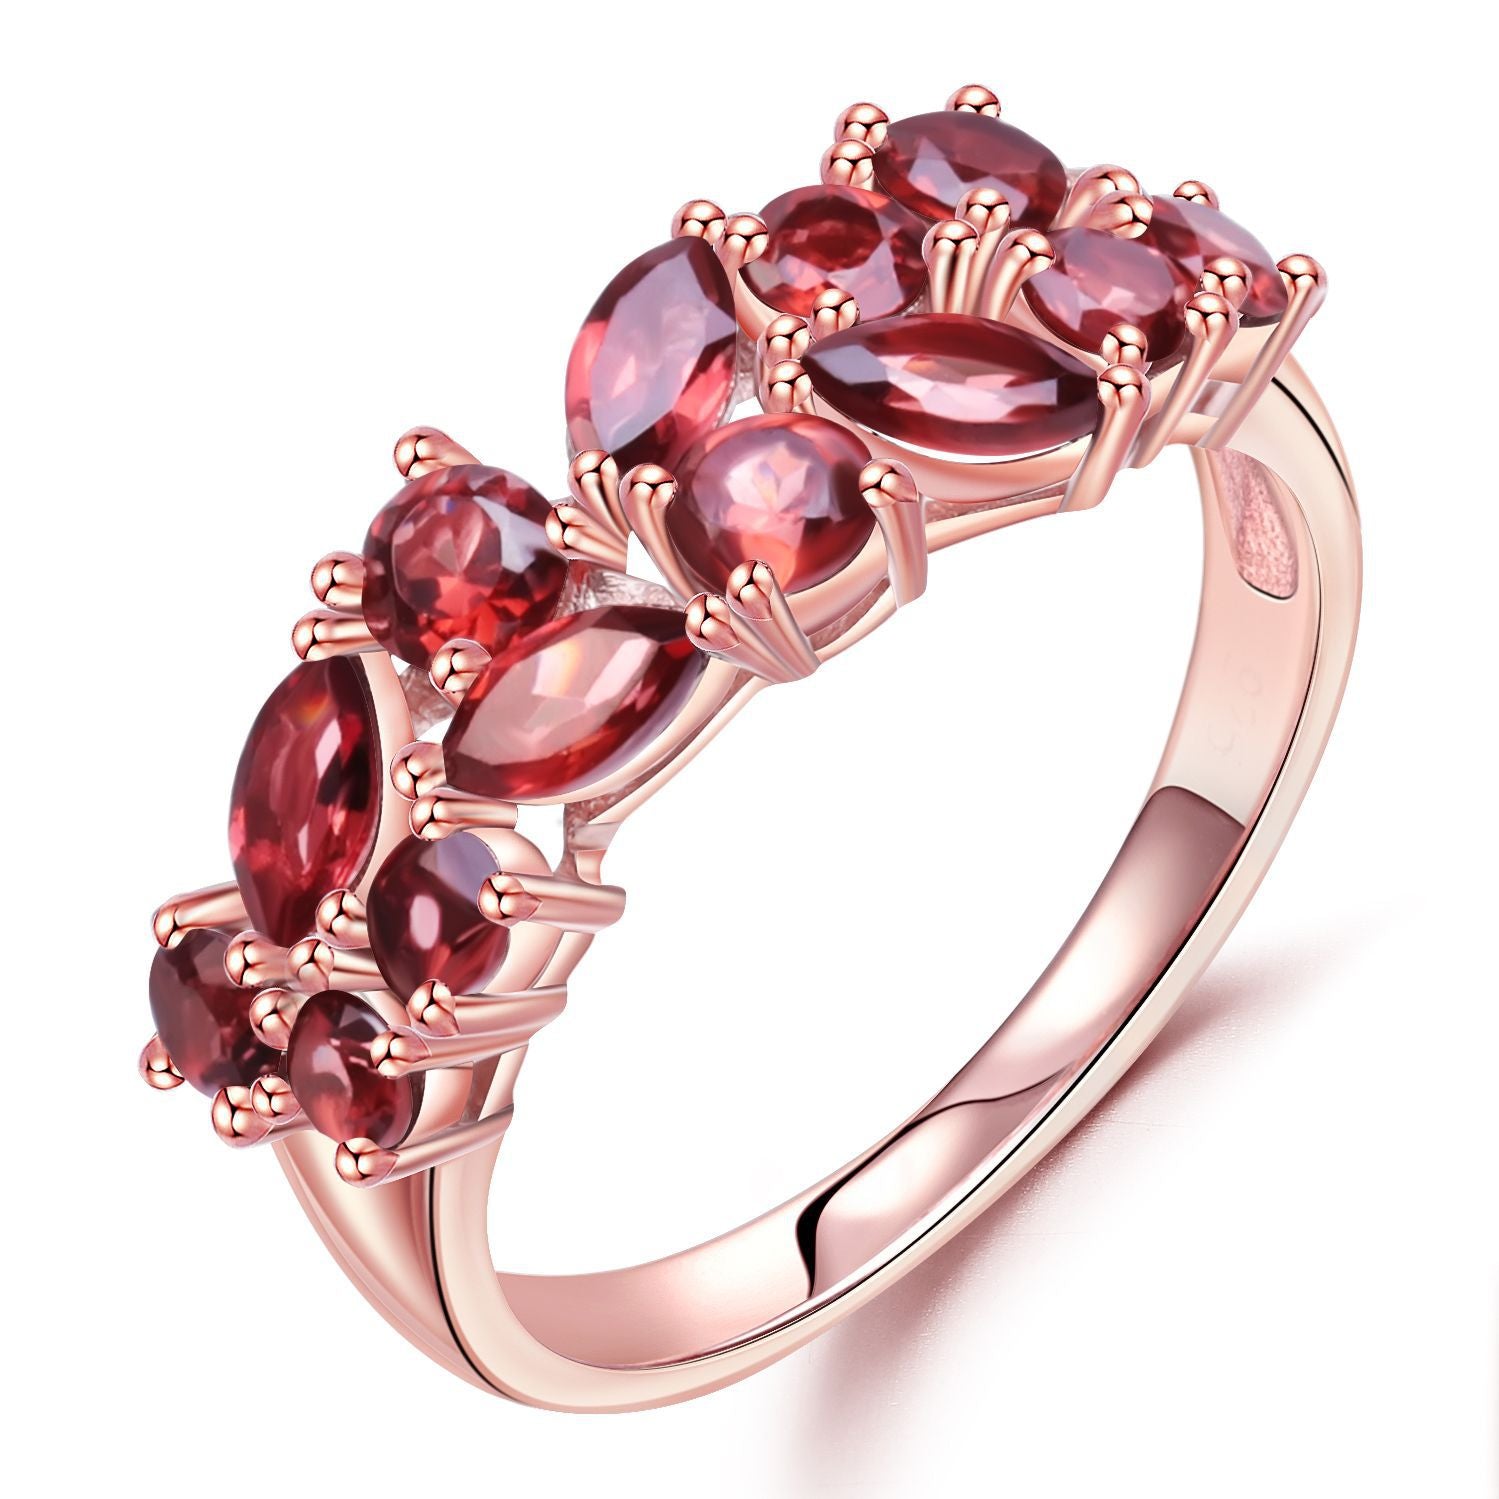 American Fashion S925 Silver Rose Gold Colour Ring for Women